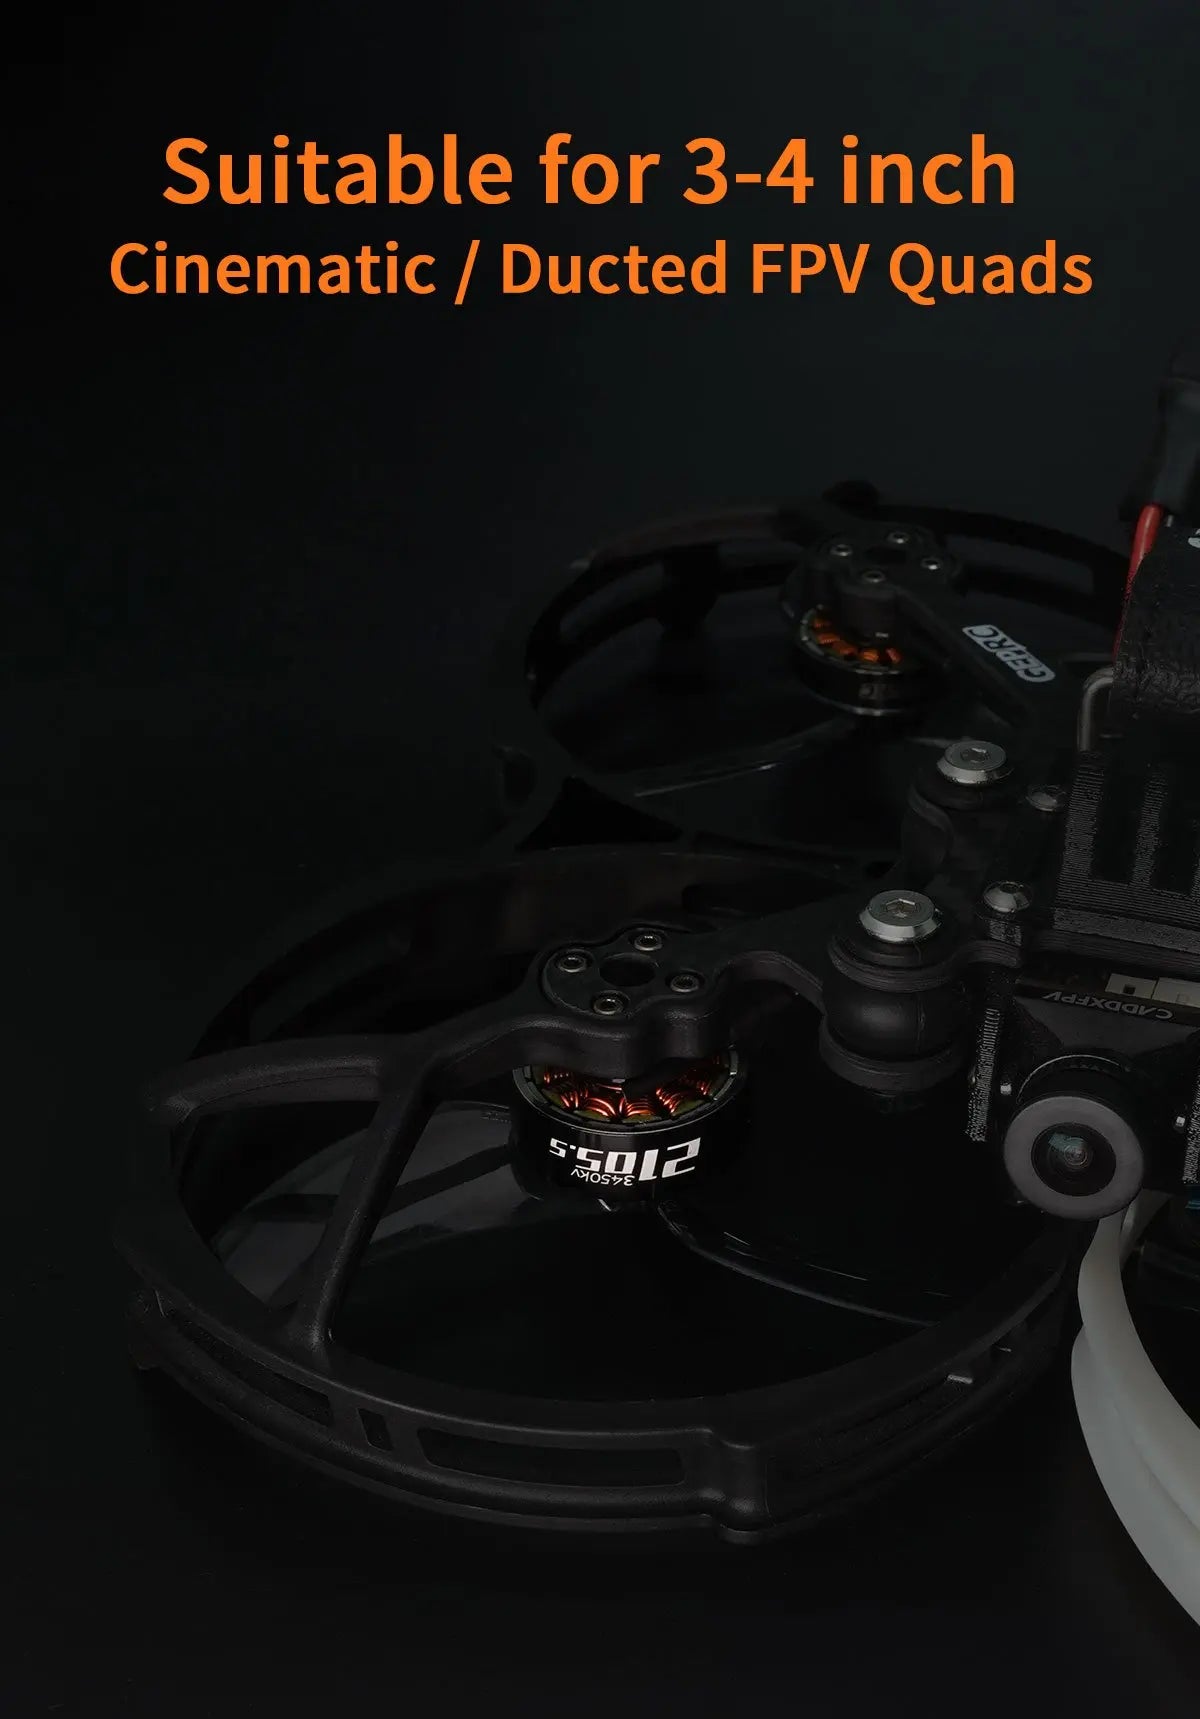 GEPRC SPEEDX2 Motor, Suitable for 3-4 inch Cinematic Ducted FPV Quads 5201z